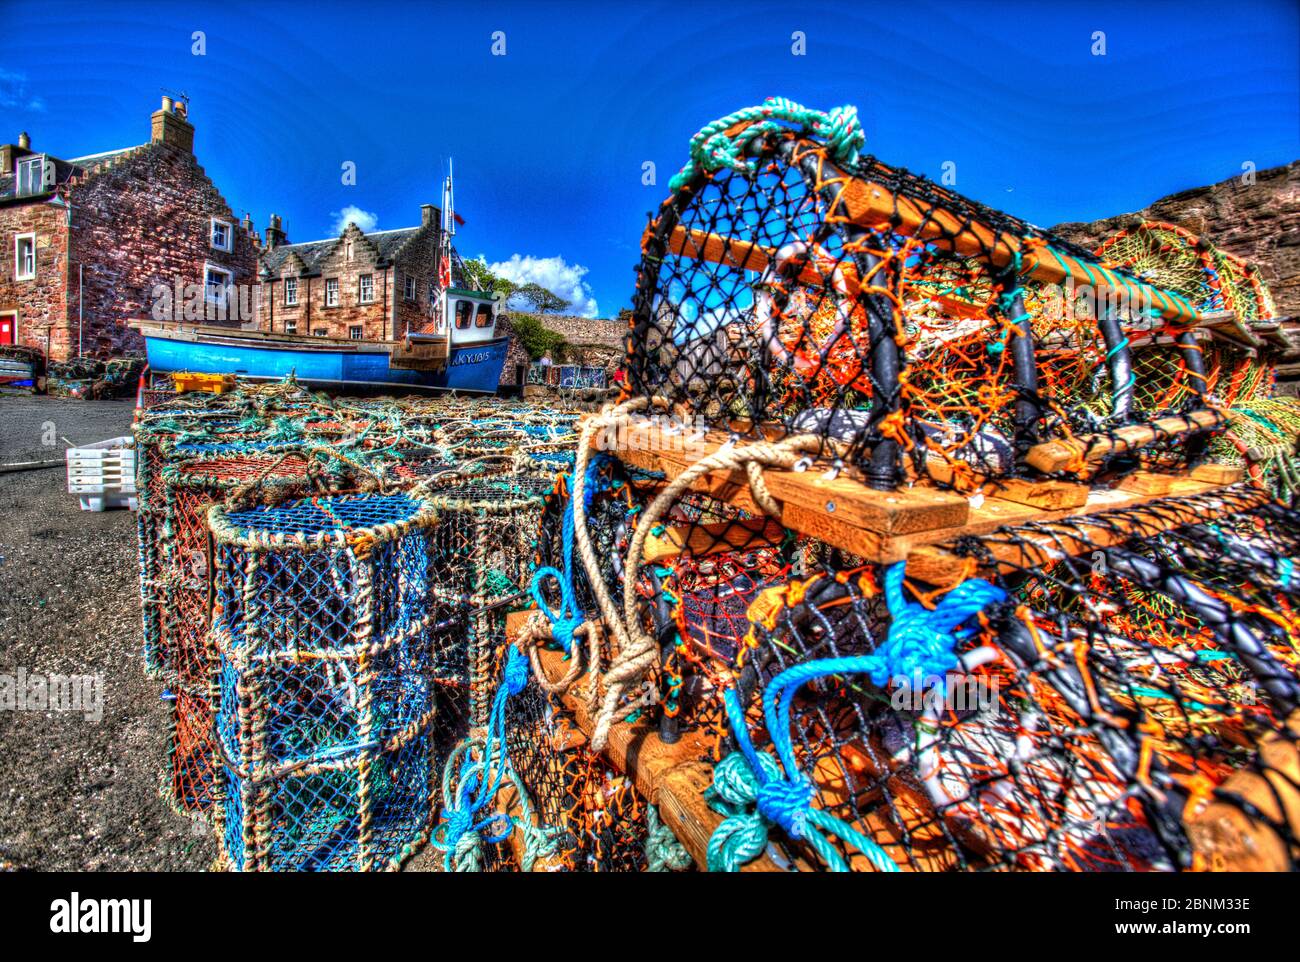 Town of Crail, Scotland. Artistic view of Crail quayside with lobster pots in the foreground and harbour residences in the background. Stock Photo